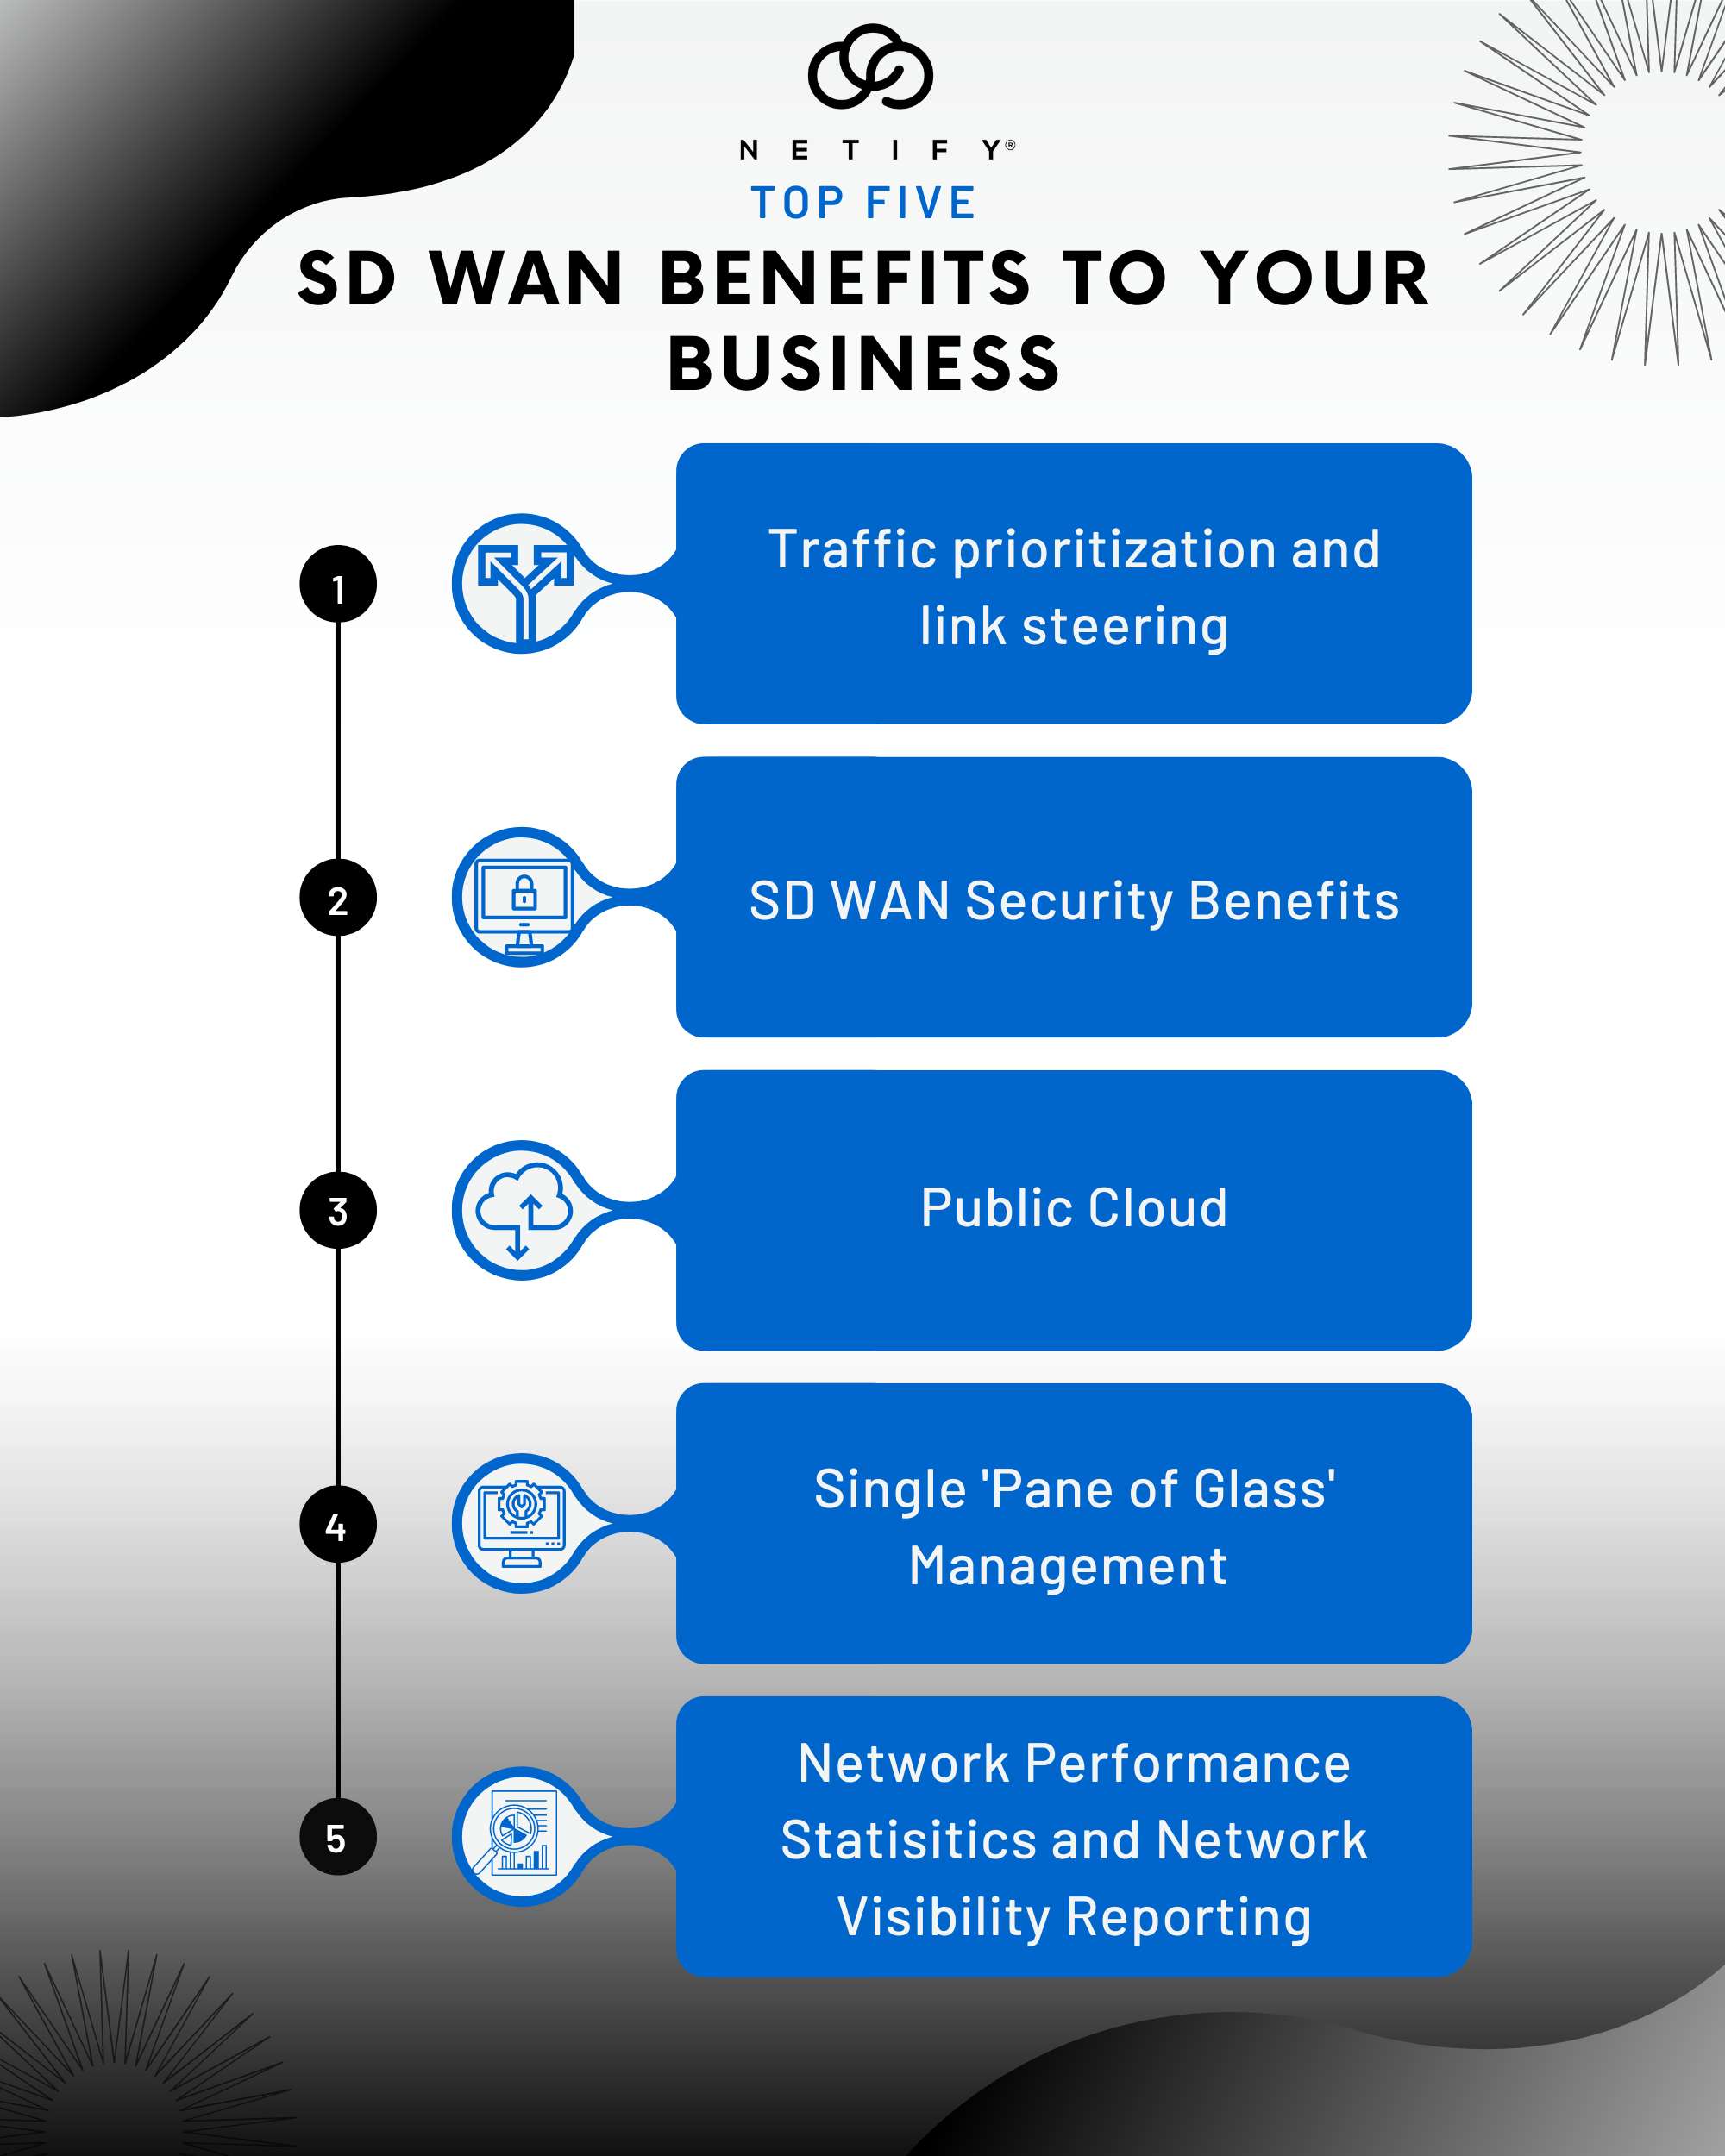 What are the top SD WAN benefits to your business?